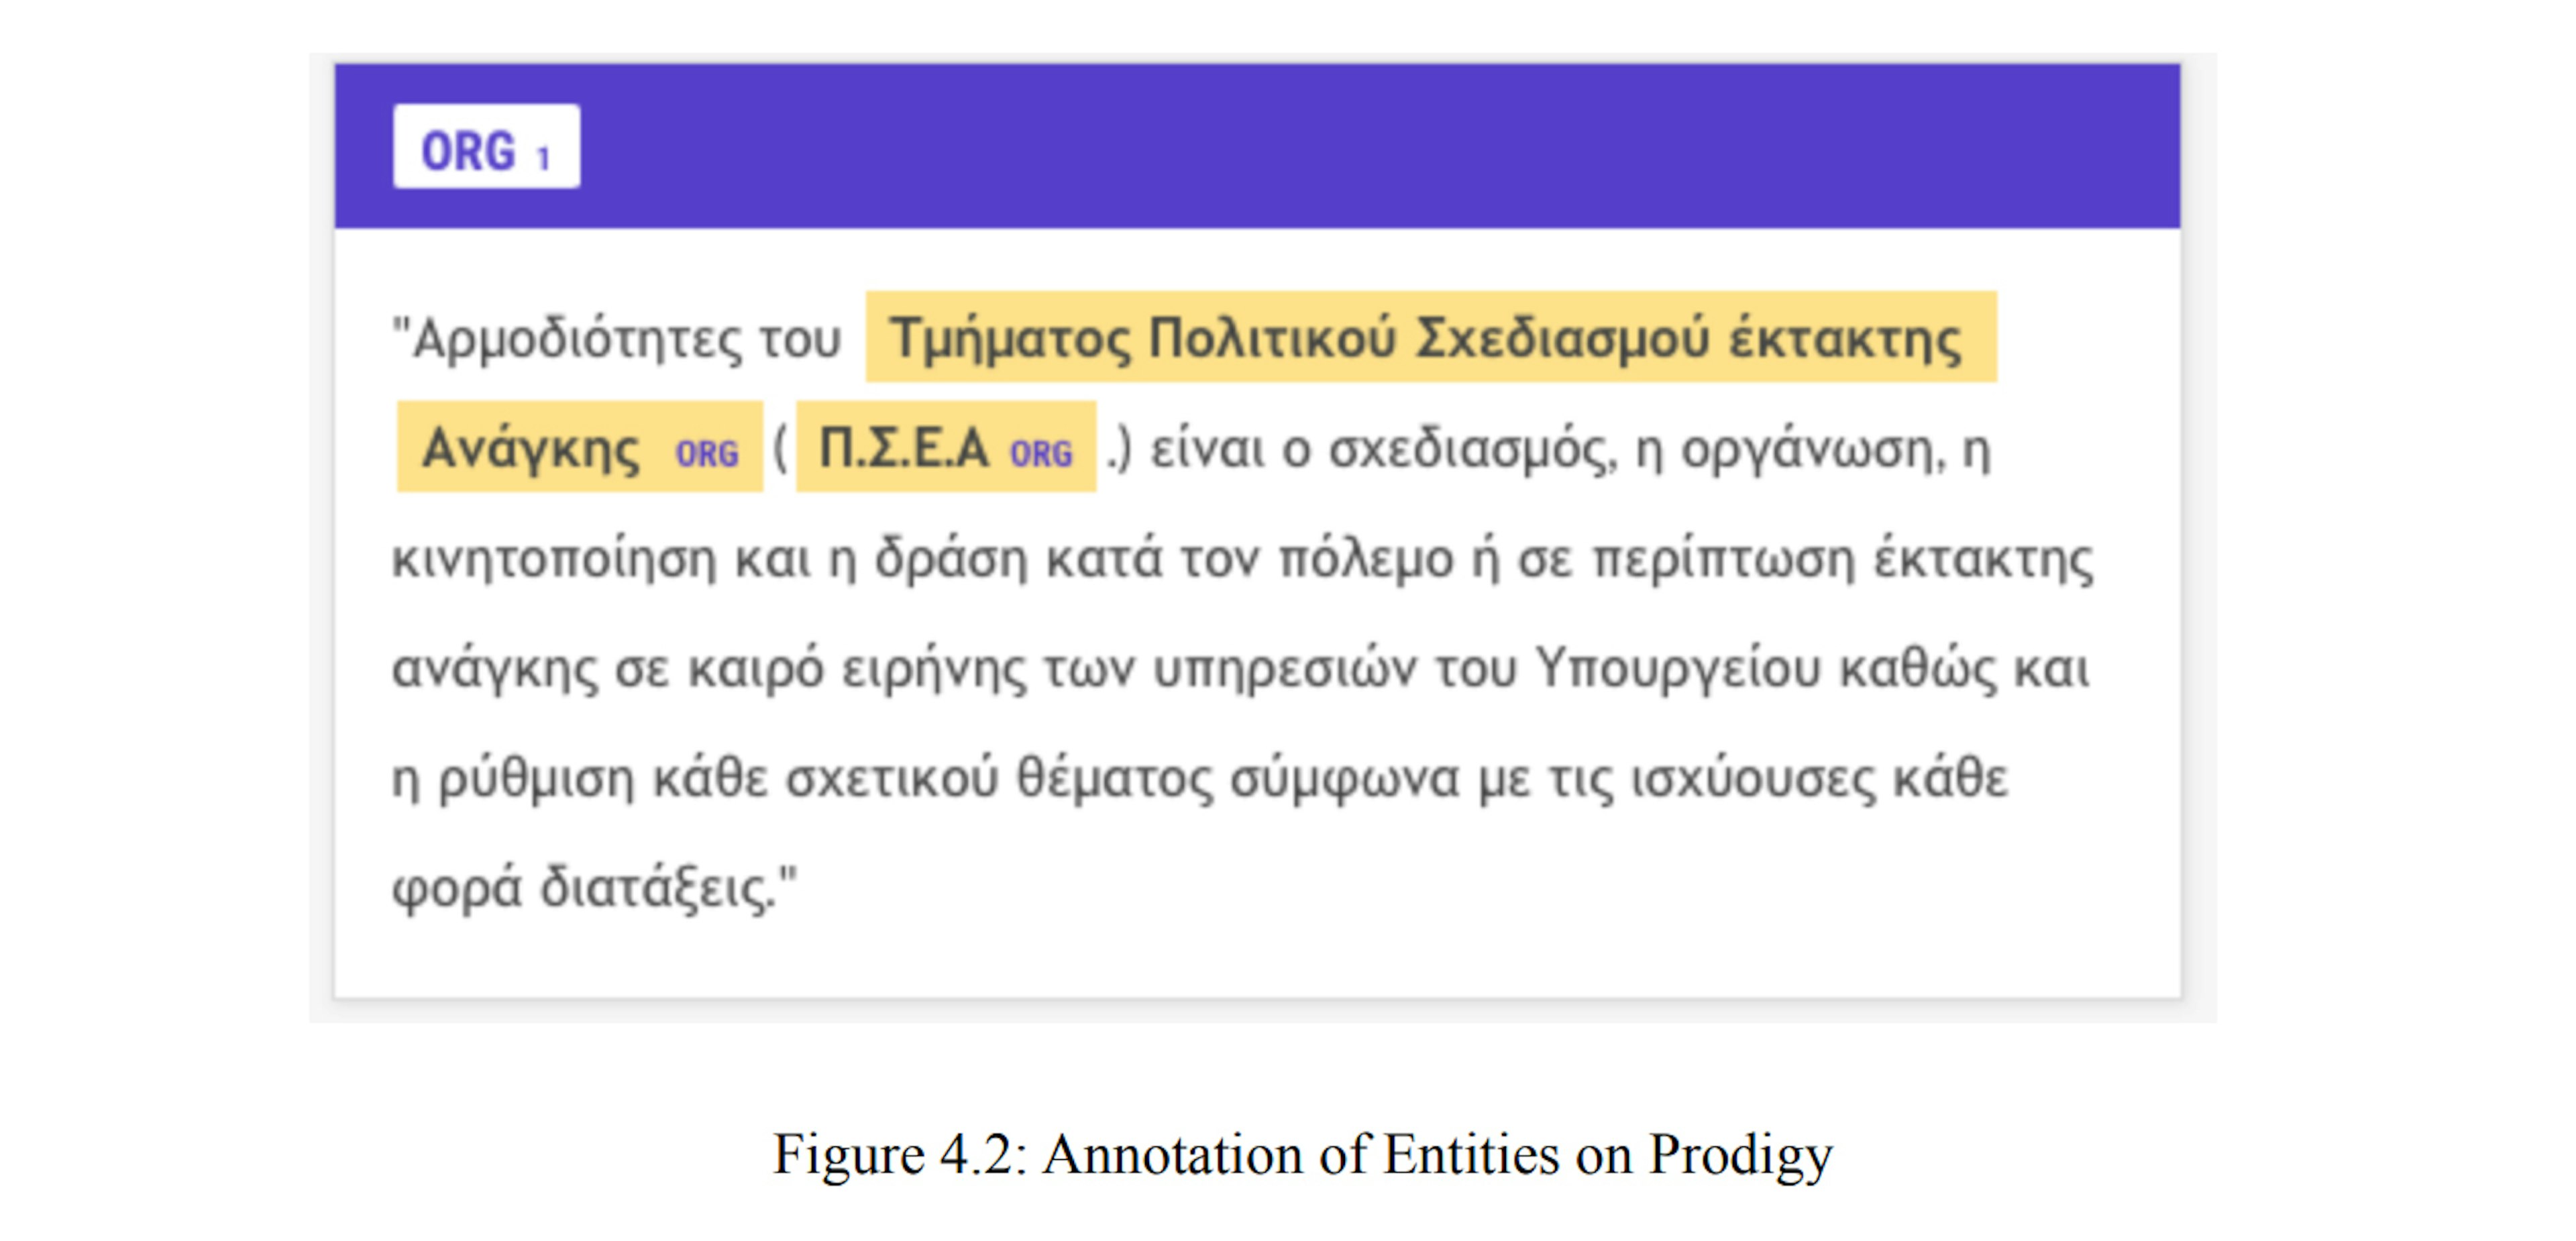 Extracting Structured Information from Greek Legislation Data